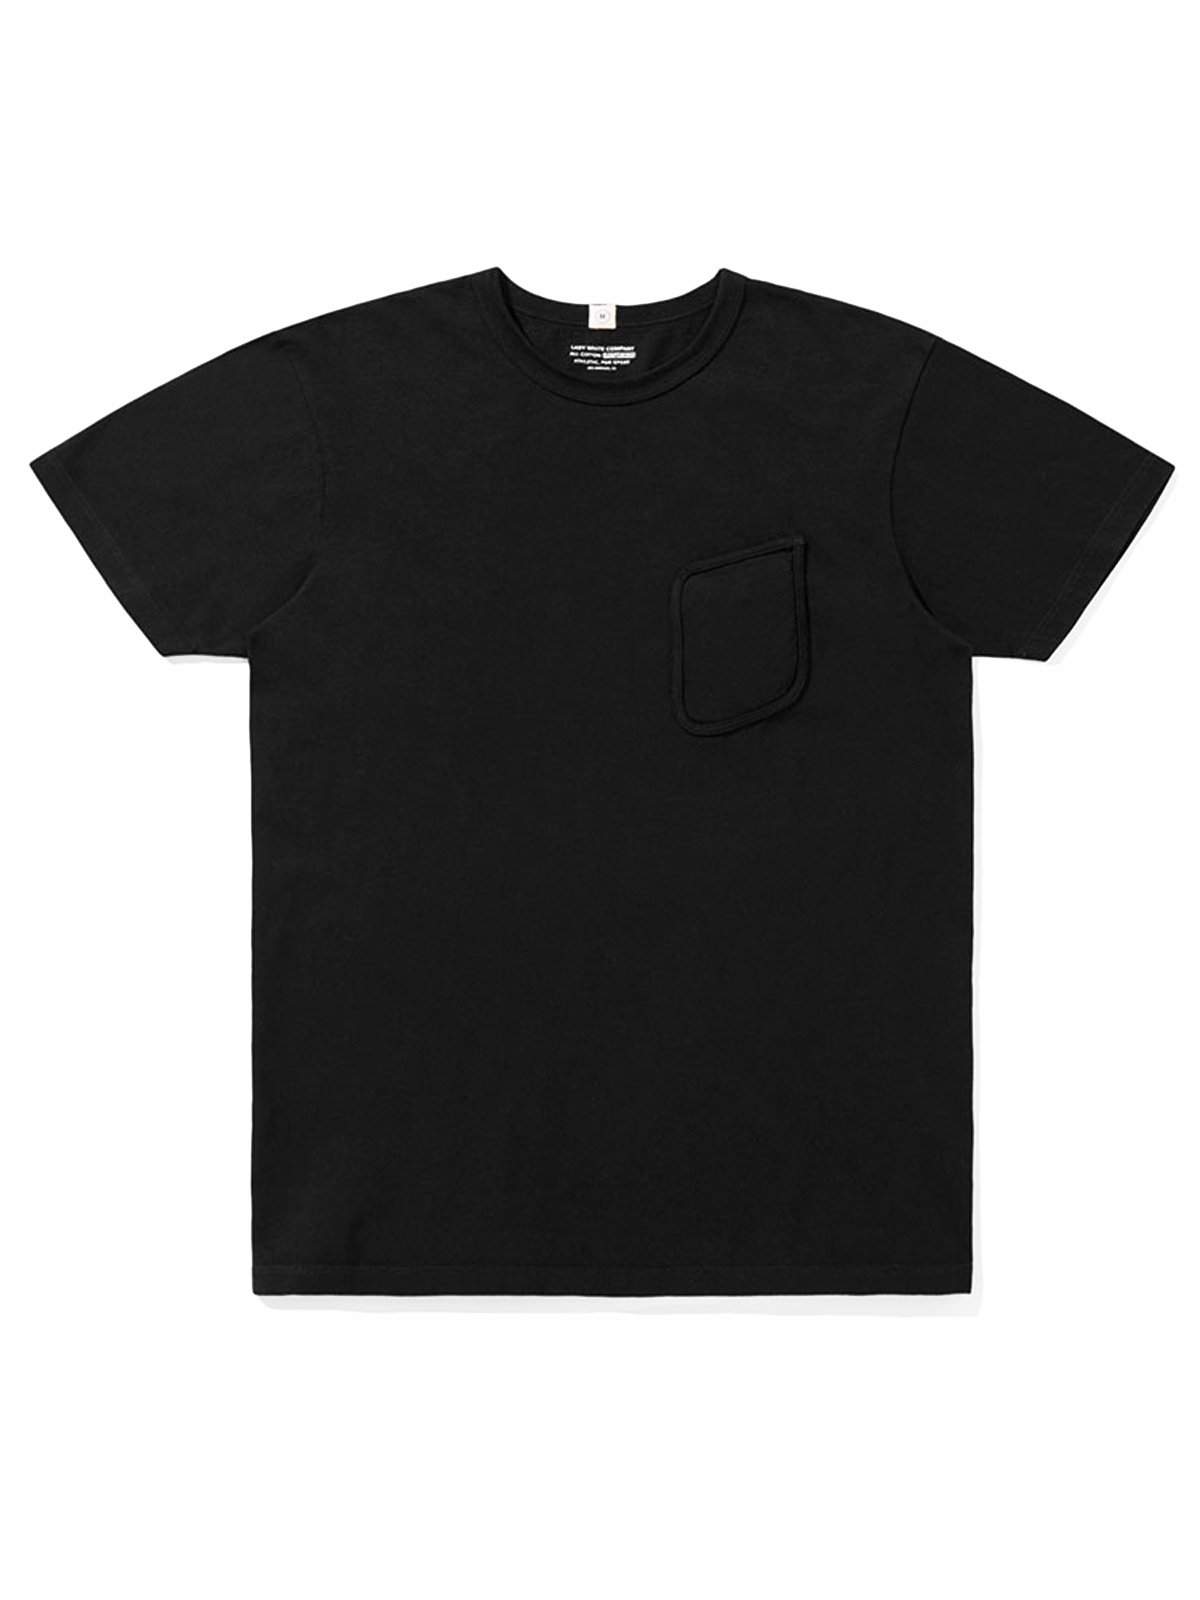 Lady White Co. Clark Pocket Tee Black - MORE by Morello Indonesia